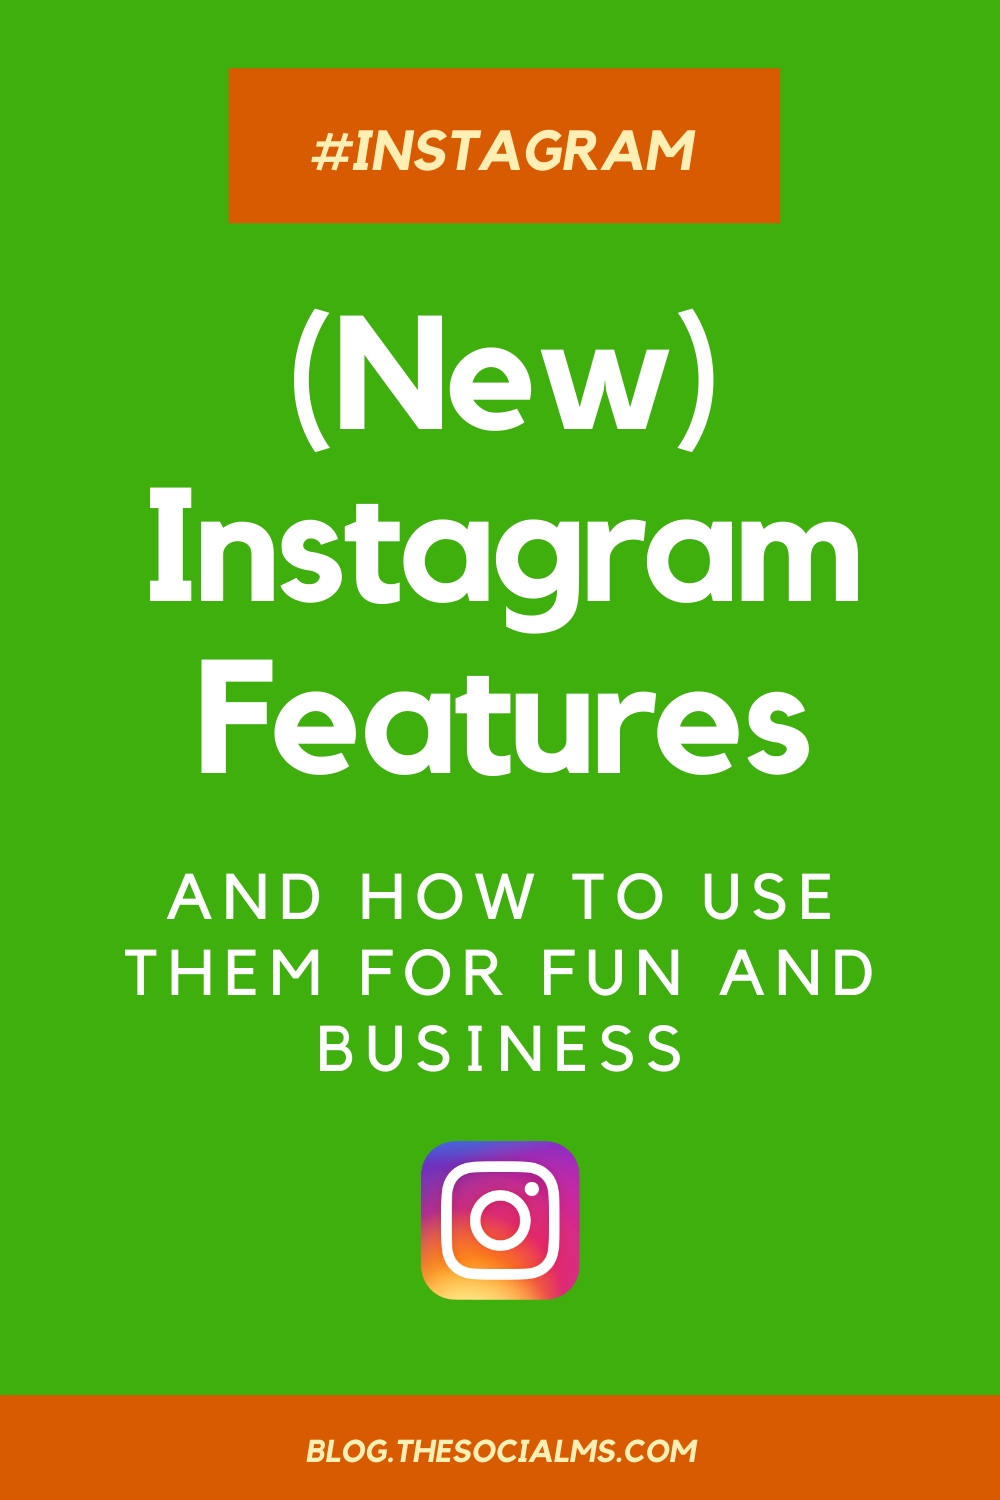 Whatever you plan on doing with your Instagram, be aware of the various features and options that you have with Instagram. Try different types of posts and stories with the Instagram features you can use. Boost your Instagram success and update your Instagram strategy with new features. #instagram #instagramfeatures #featuresforinstagram #instagramtips #instagrammarketing #instagramhacks #instagrambestpractices